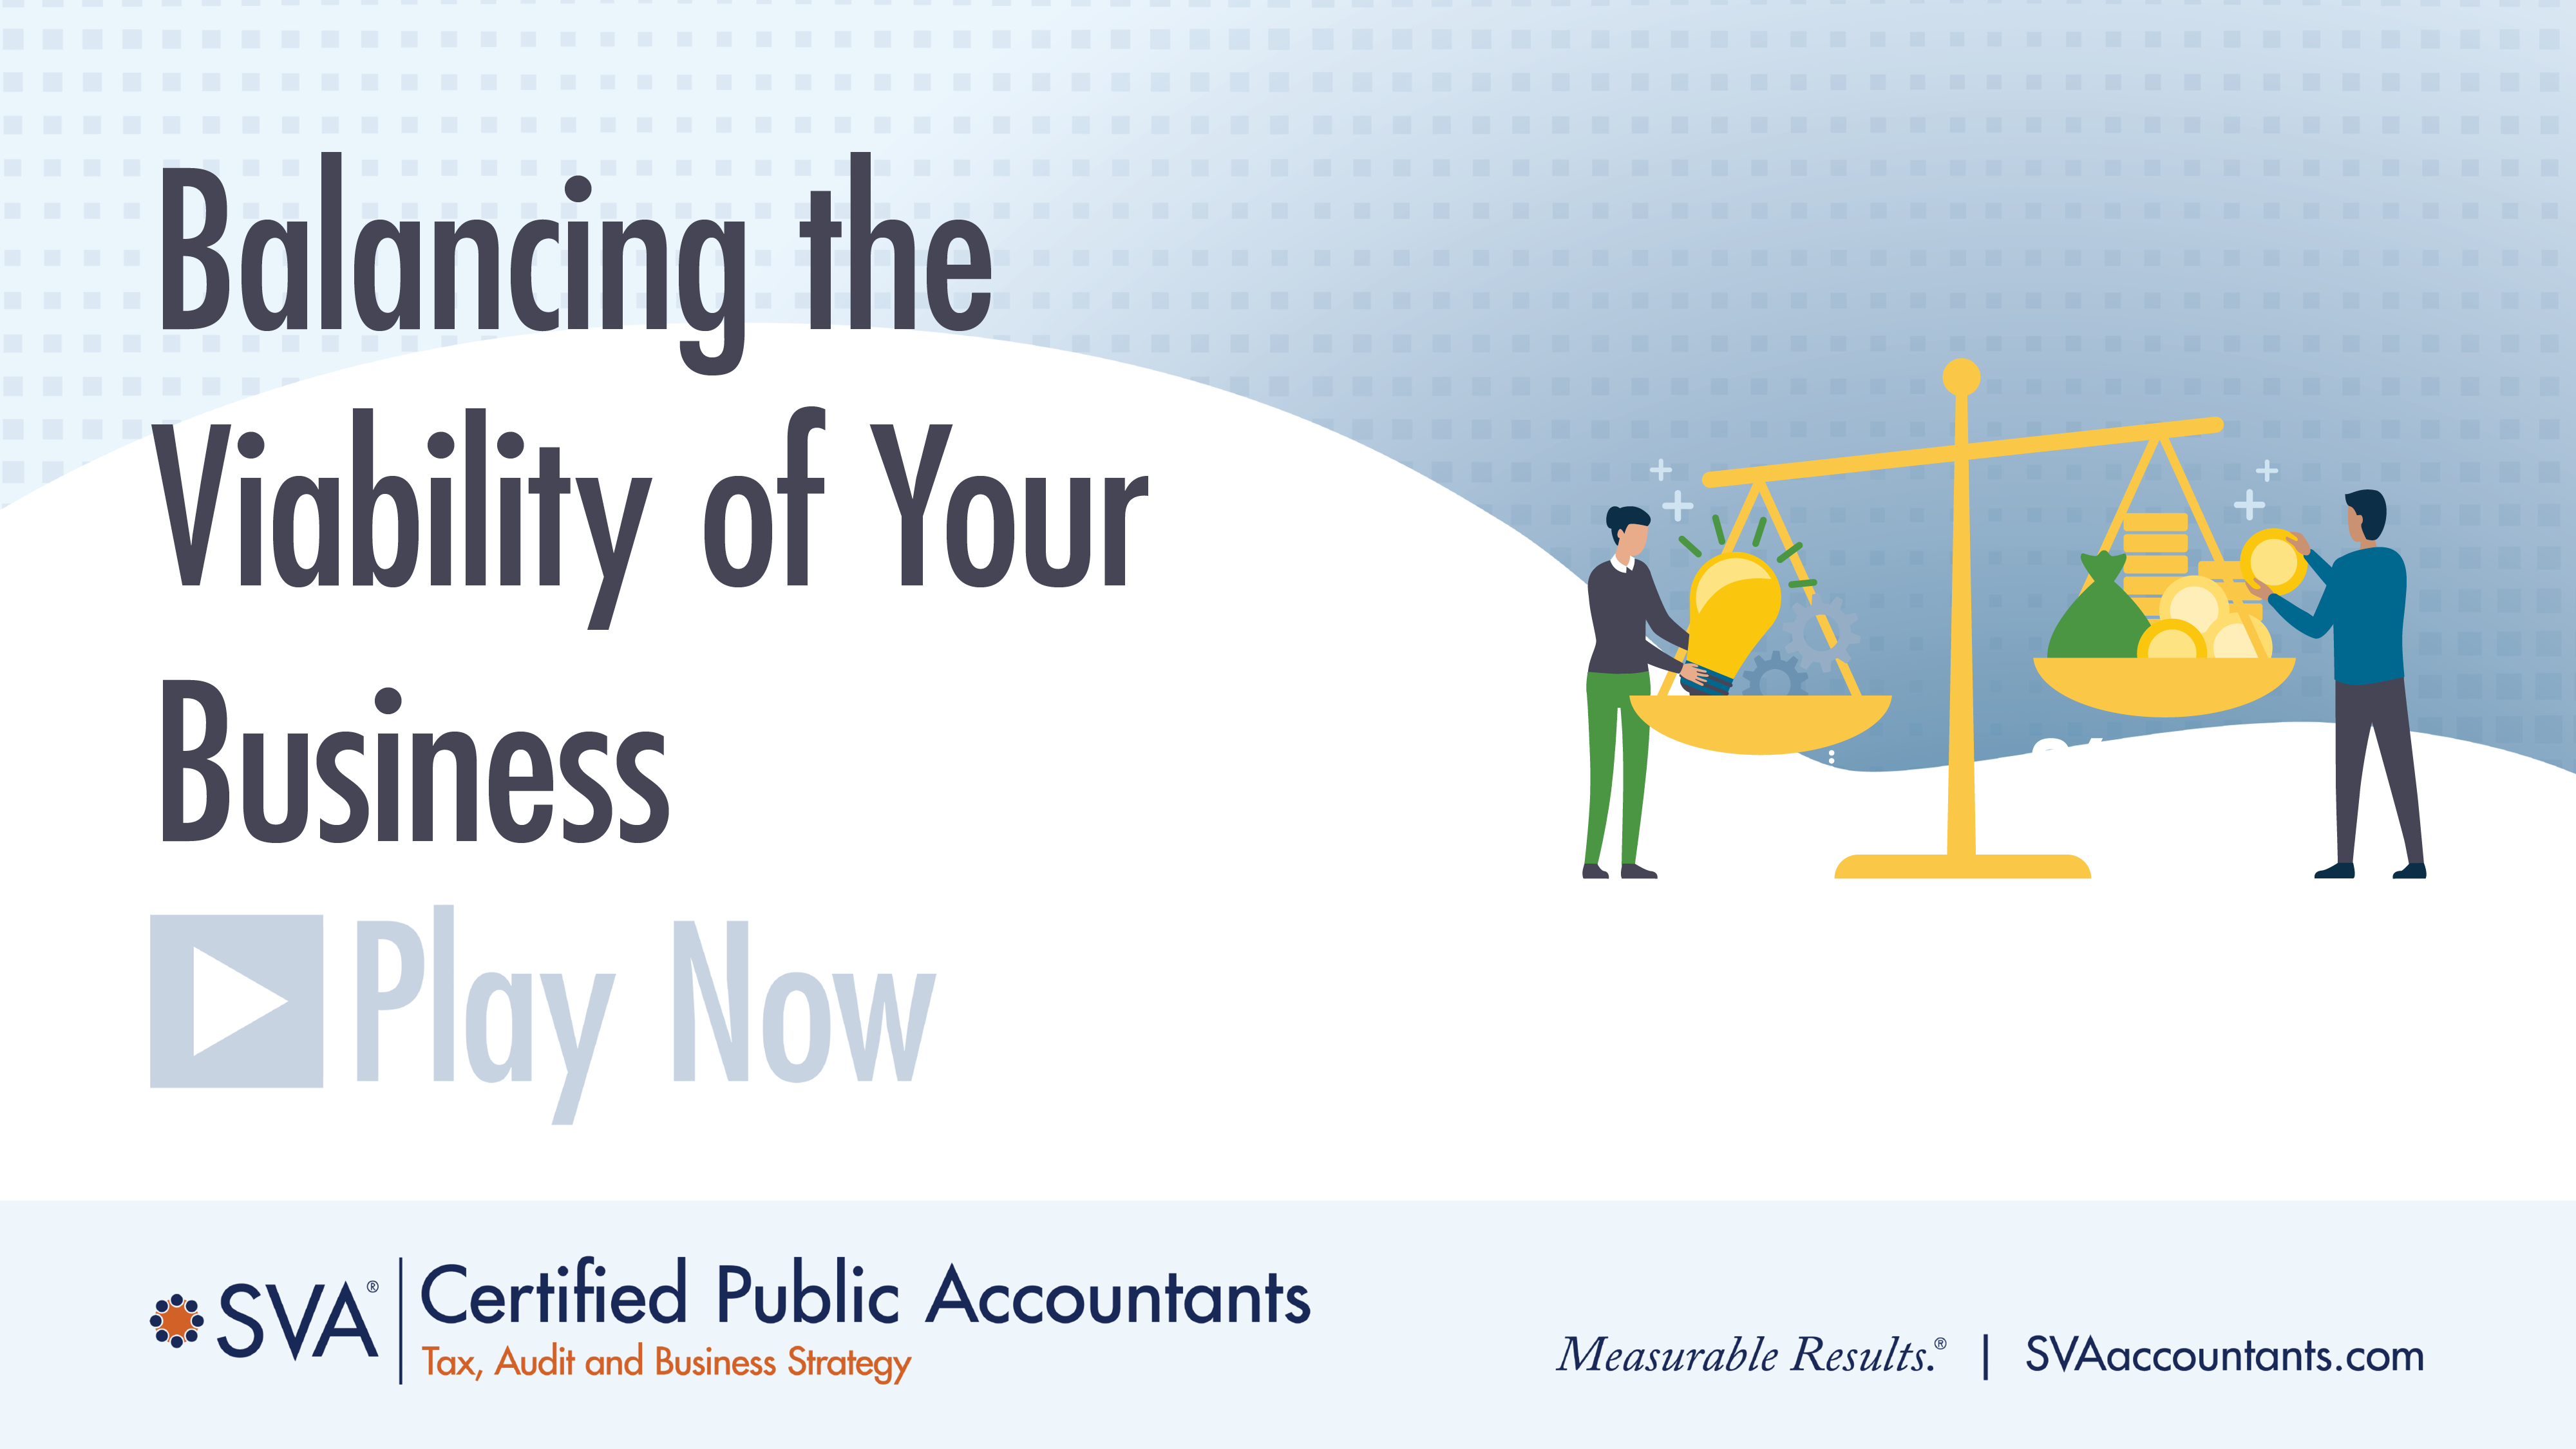 Balancing the Viability of Your Business